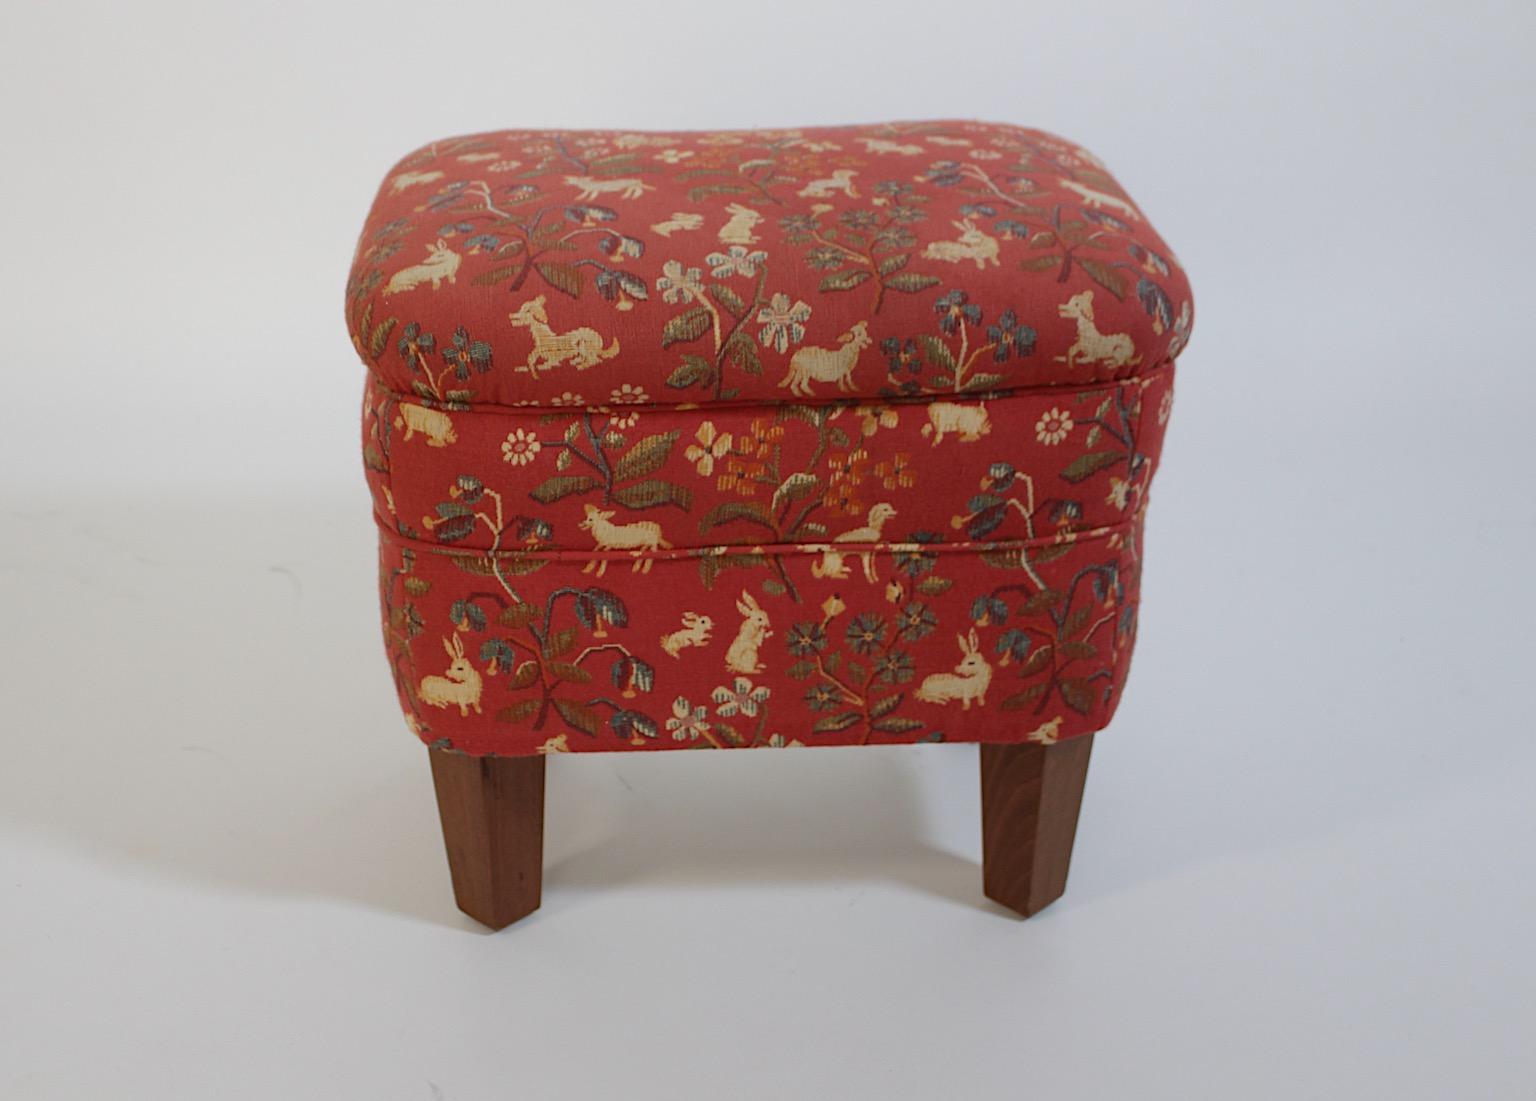 Art Deco vintage rectangular vintage tabouret or stool from beech and soft pink original textile fabric by Friedrich Otto Schmidt circa 1925, Vienna.
An amazing tabouret or stool in rectangular shape with four ( 4 ) squared feet from solid